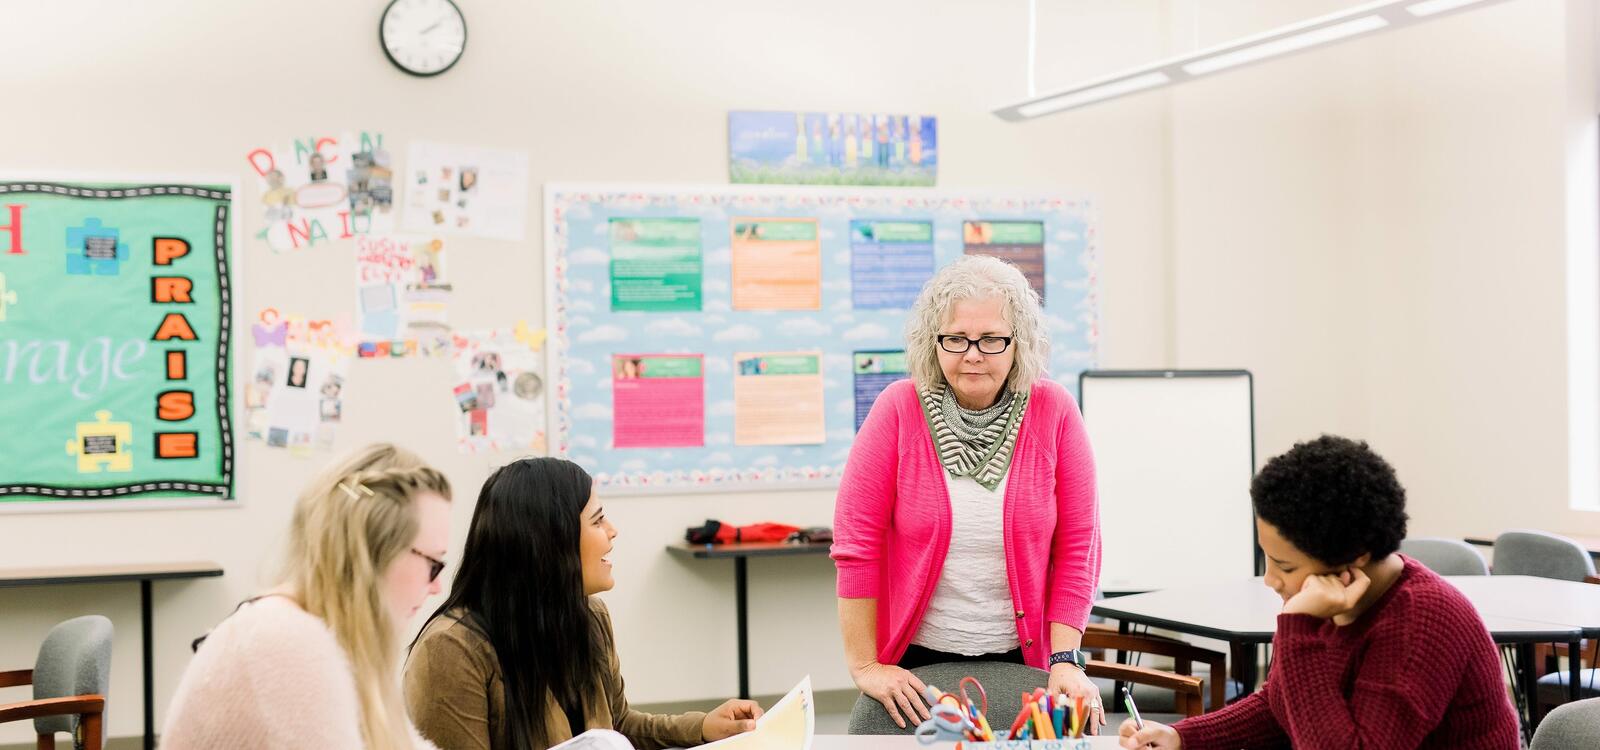 In an educational classroom filled with colorful posters, a professor stands beside a rounded desk, speaking to her students